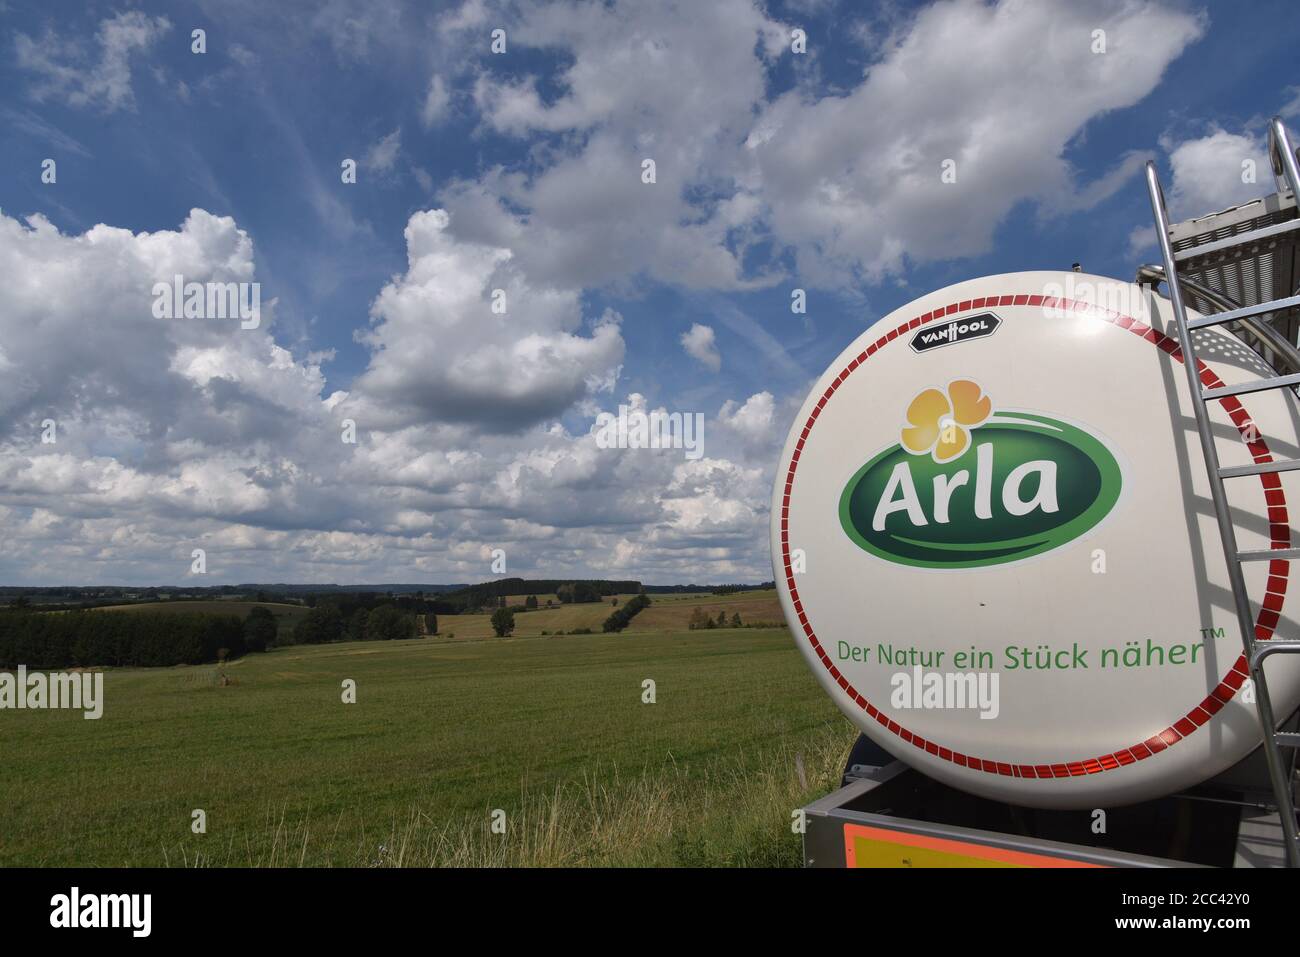 August 2020, Belgium, Sankt Vith: A milk from the ARLA dairy with the advertisement "A little closer to nature" is parked by the roadside next to a Photo: Horst